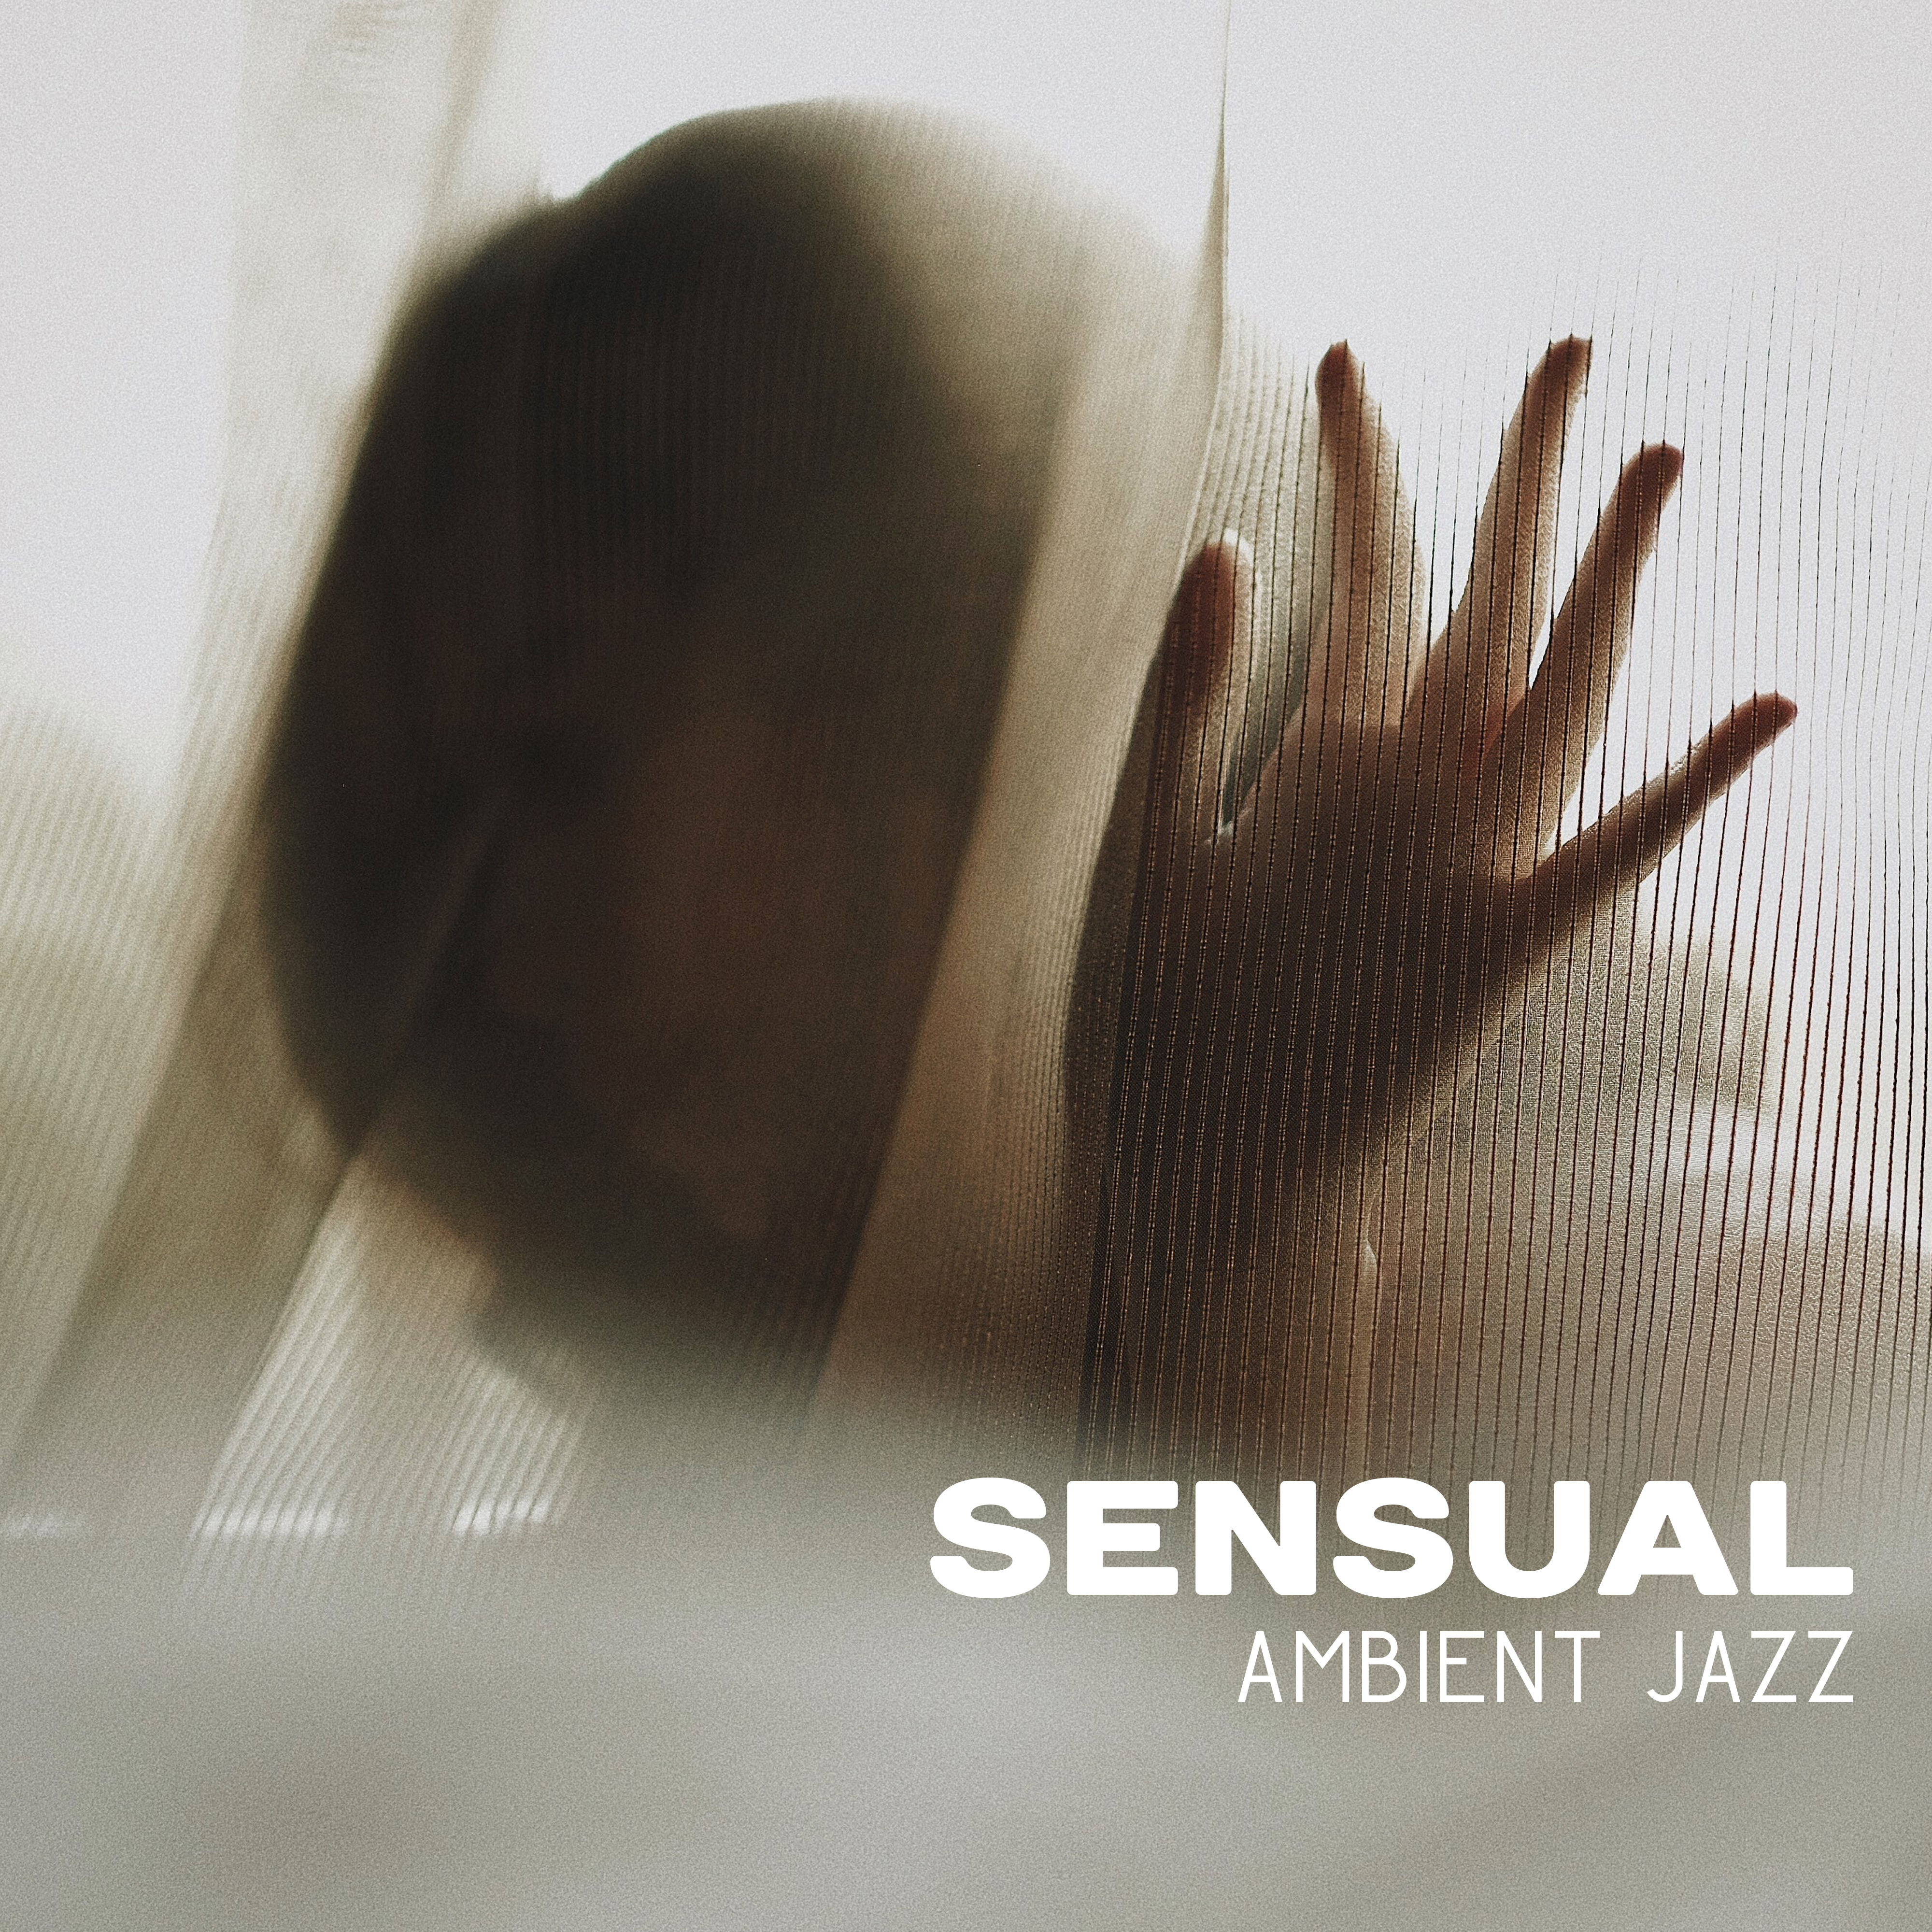 Sensual Ambient Jazz  Calm Jazz Music for Romantic Evening,  Sounds, Erotic Melodies, Songs for Lovers